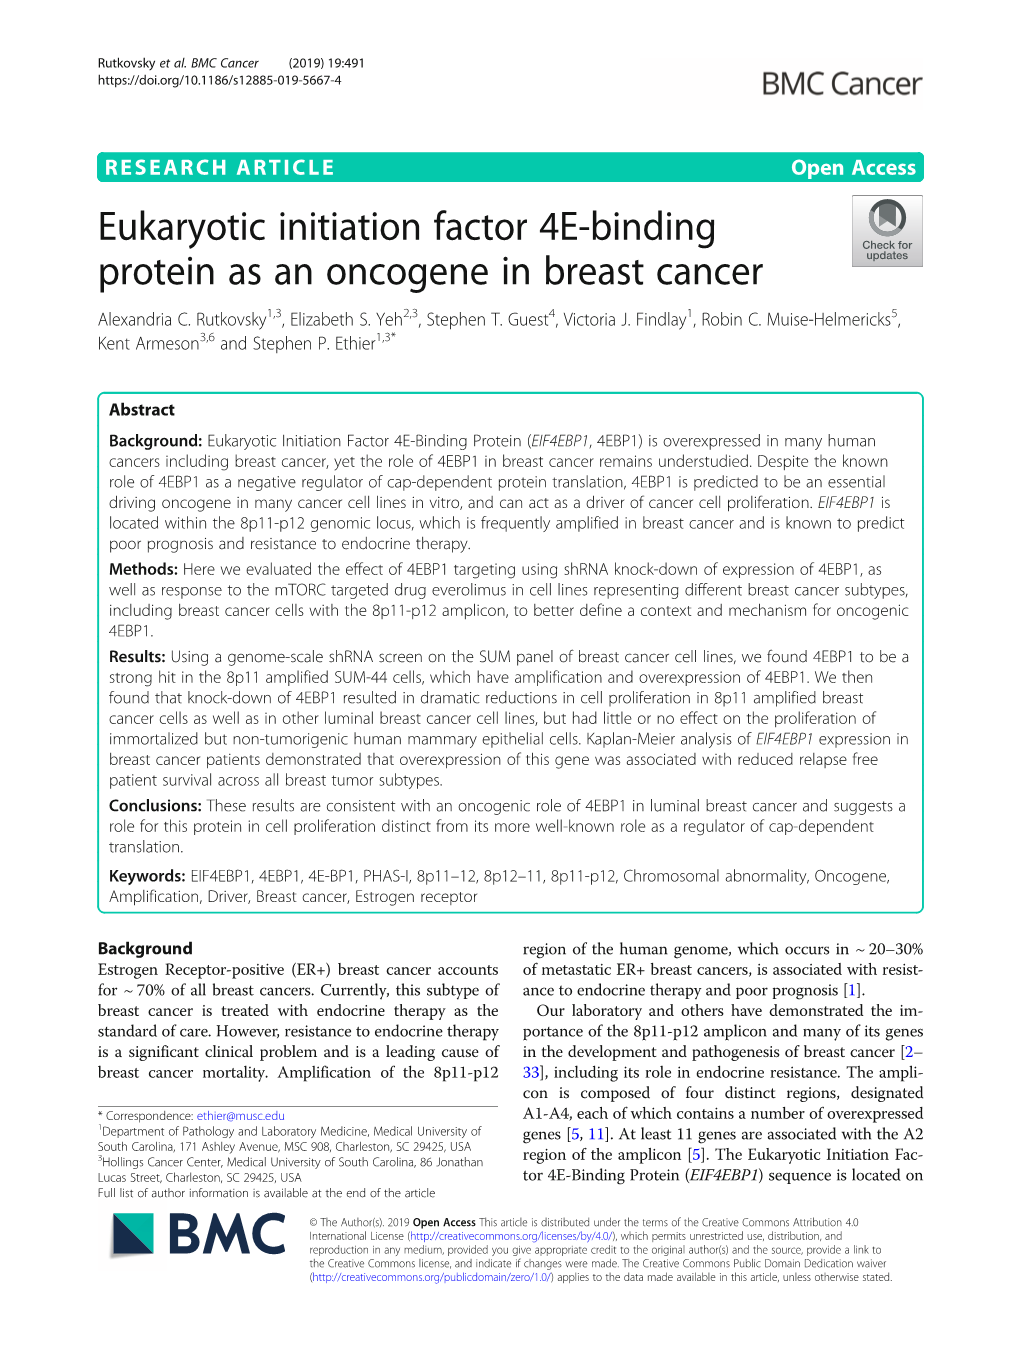 Eukaryotic Initiation Factor 4E-Binding Protein As an Oncogene in Breast Cancer Alexandria C